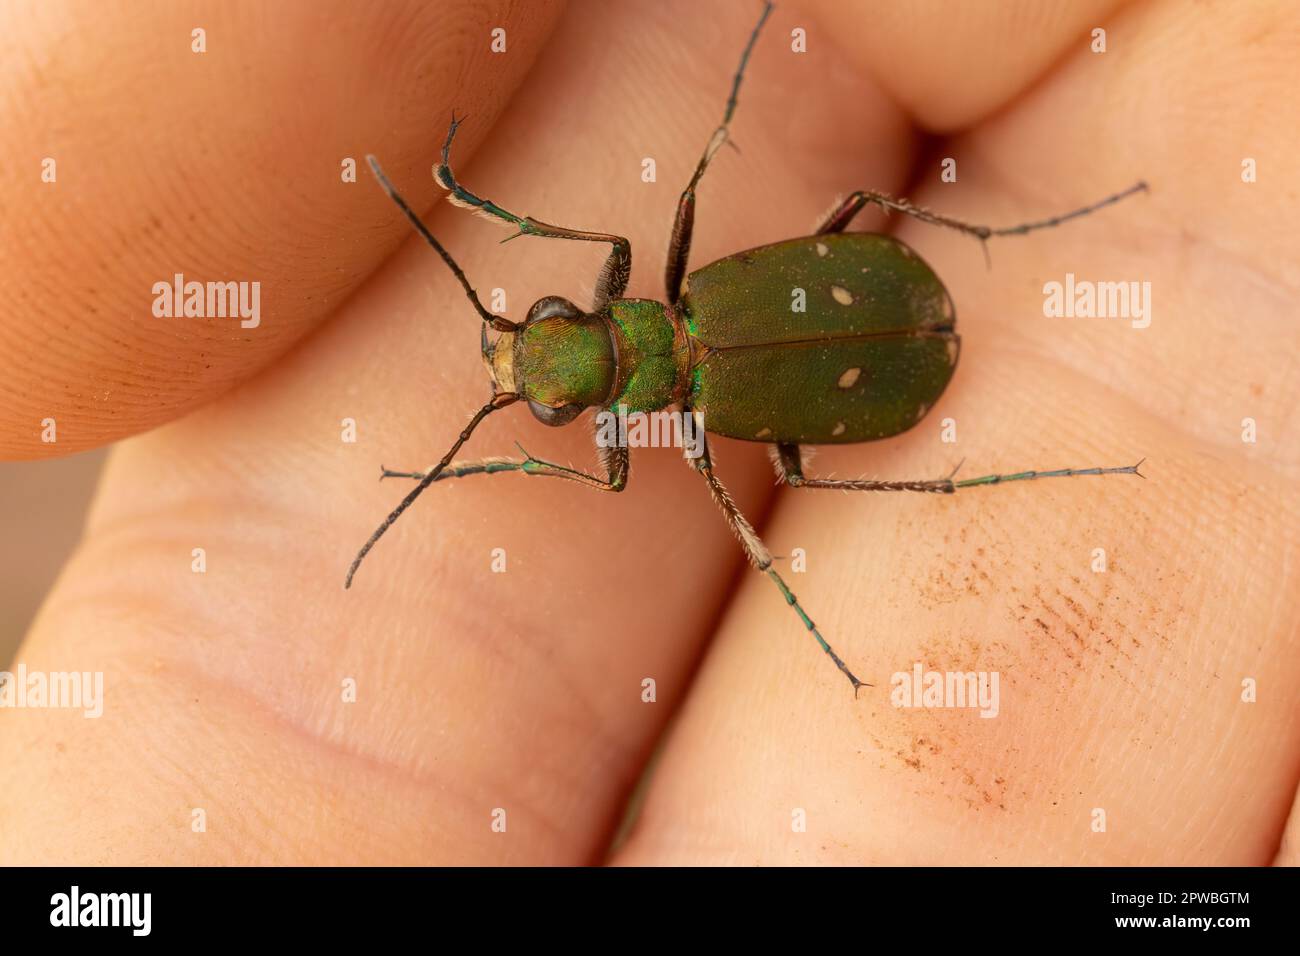 Green tiger beetle in the hand, UK. Stock Photo